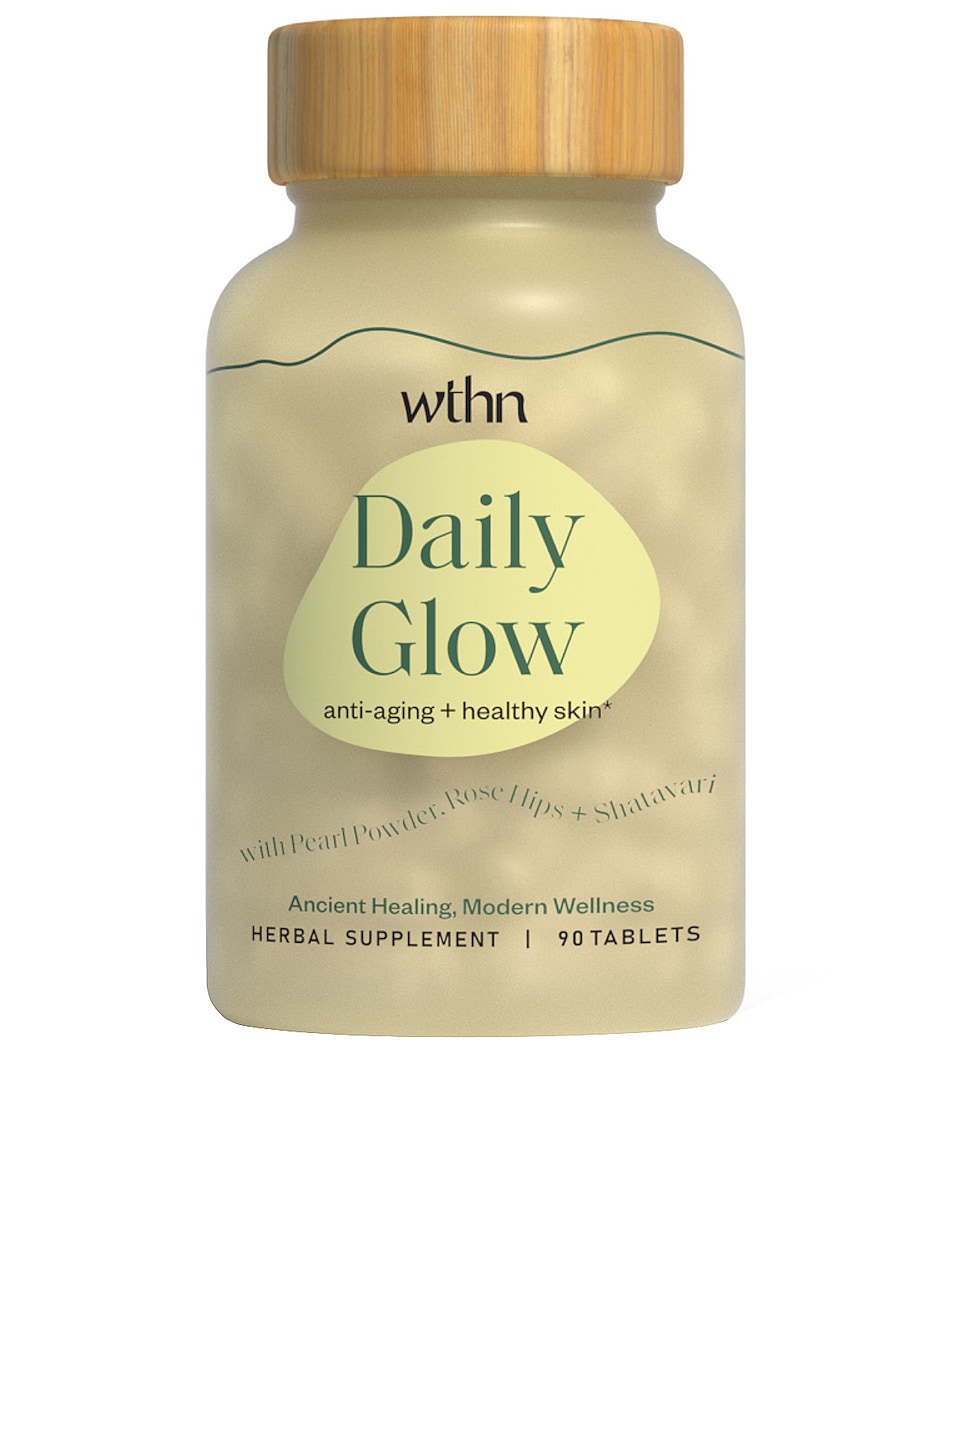 Skin Health Tablets, Daily Glow, Herbal Supplement